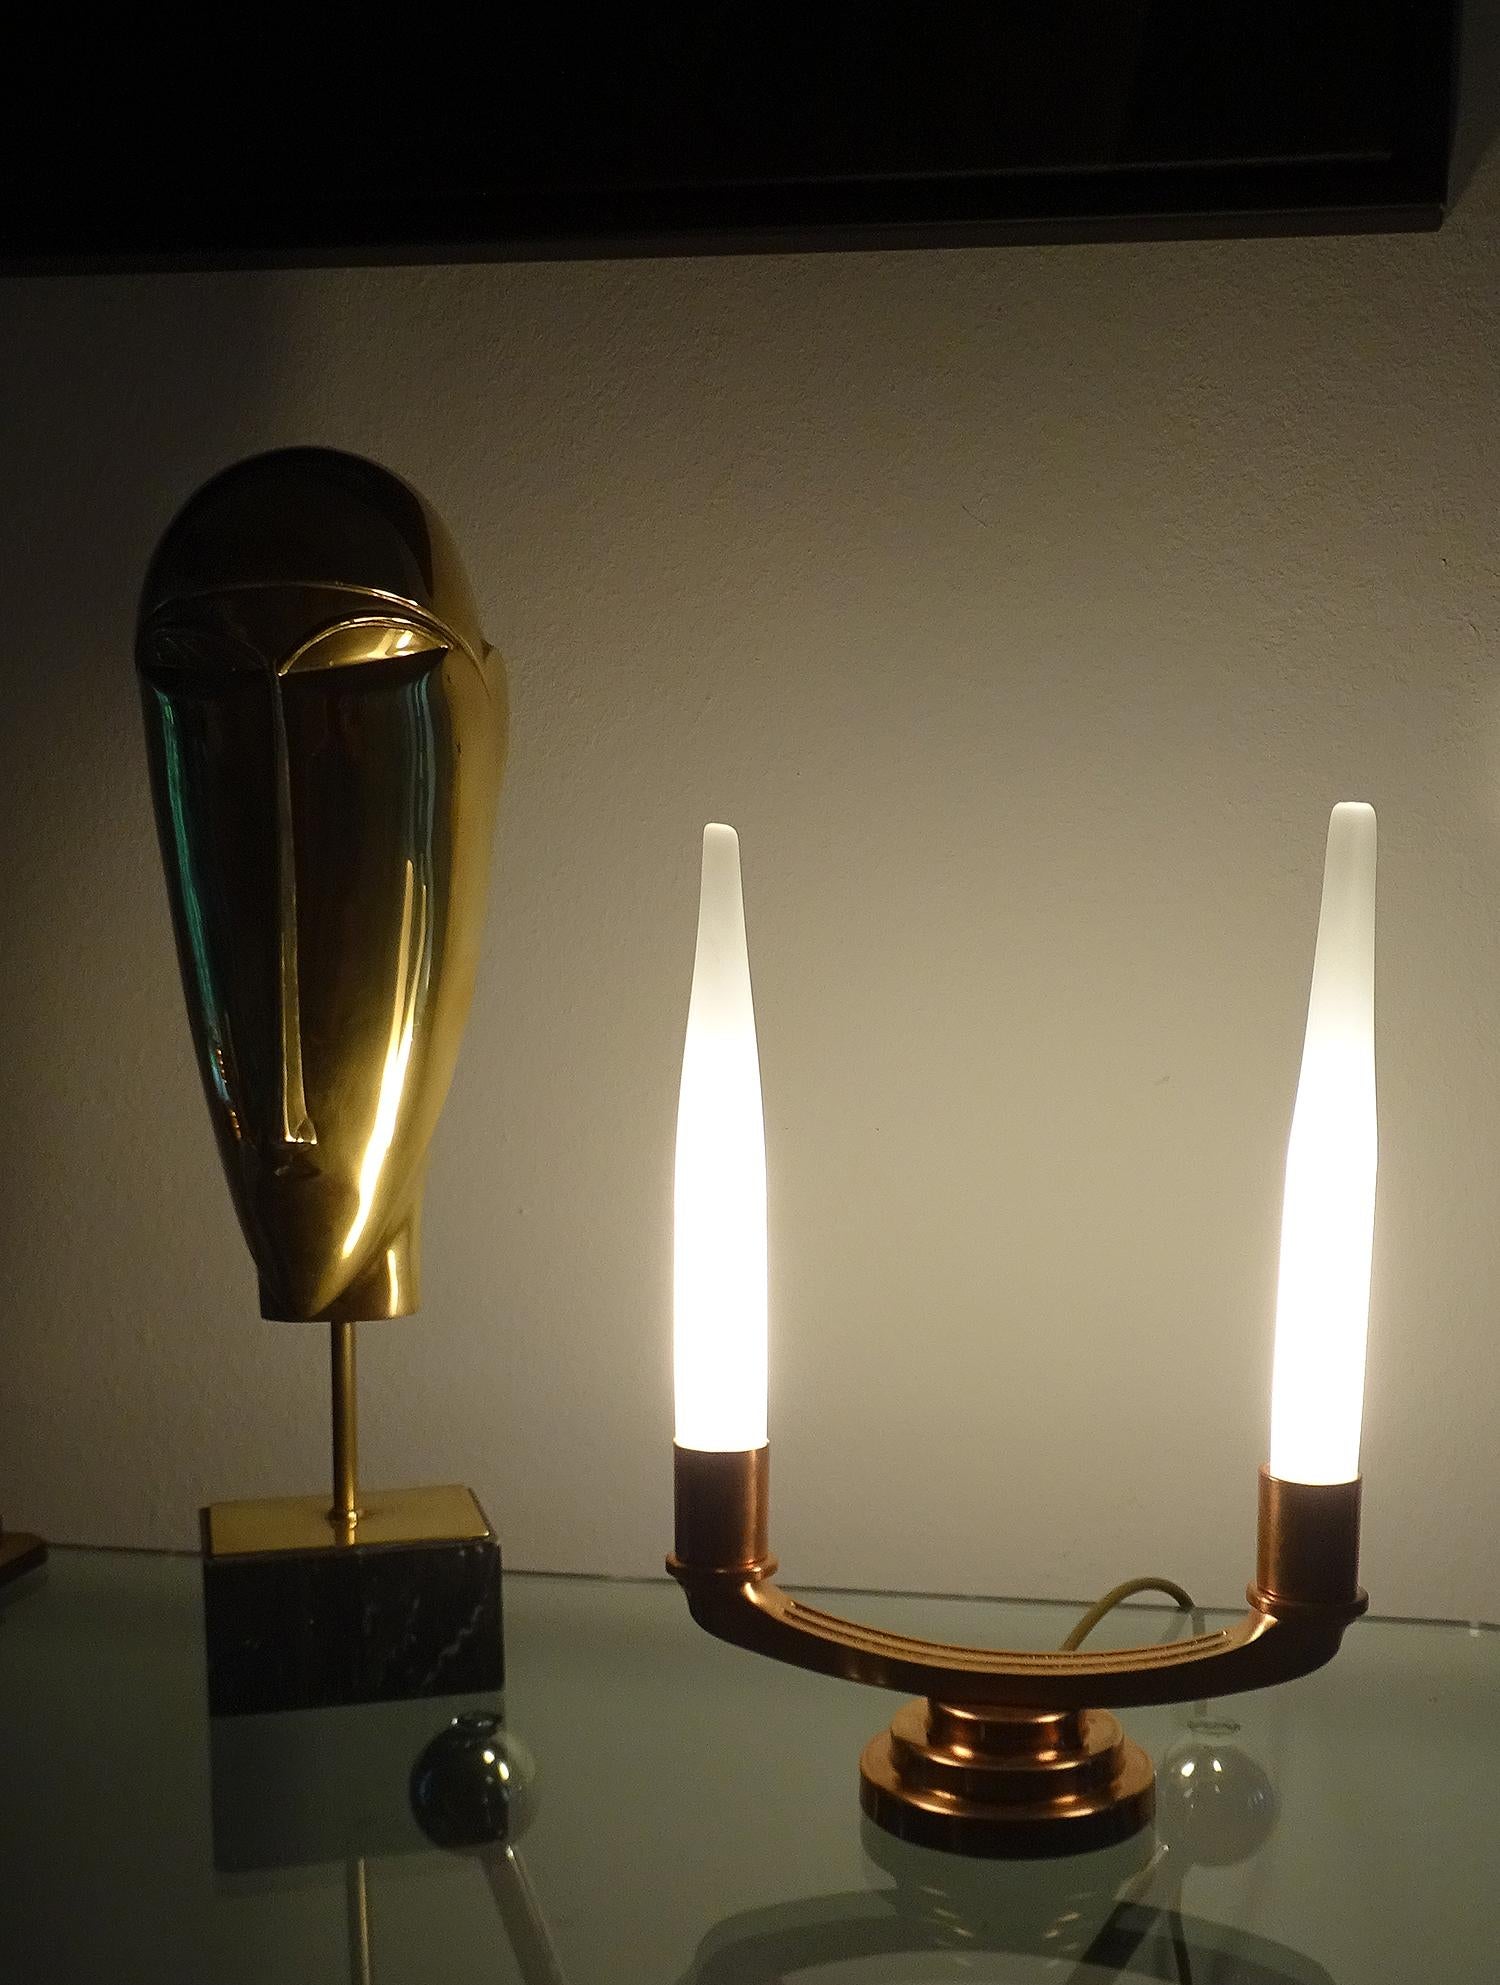 Pair of French Art Deco Modernist Uplighter  Lamps, Brass Copper Glass  Lights For Sale 4